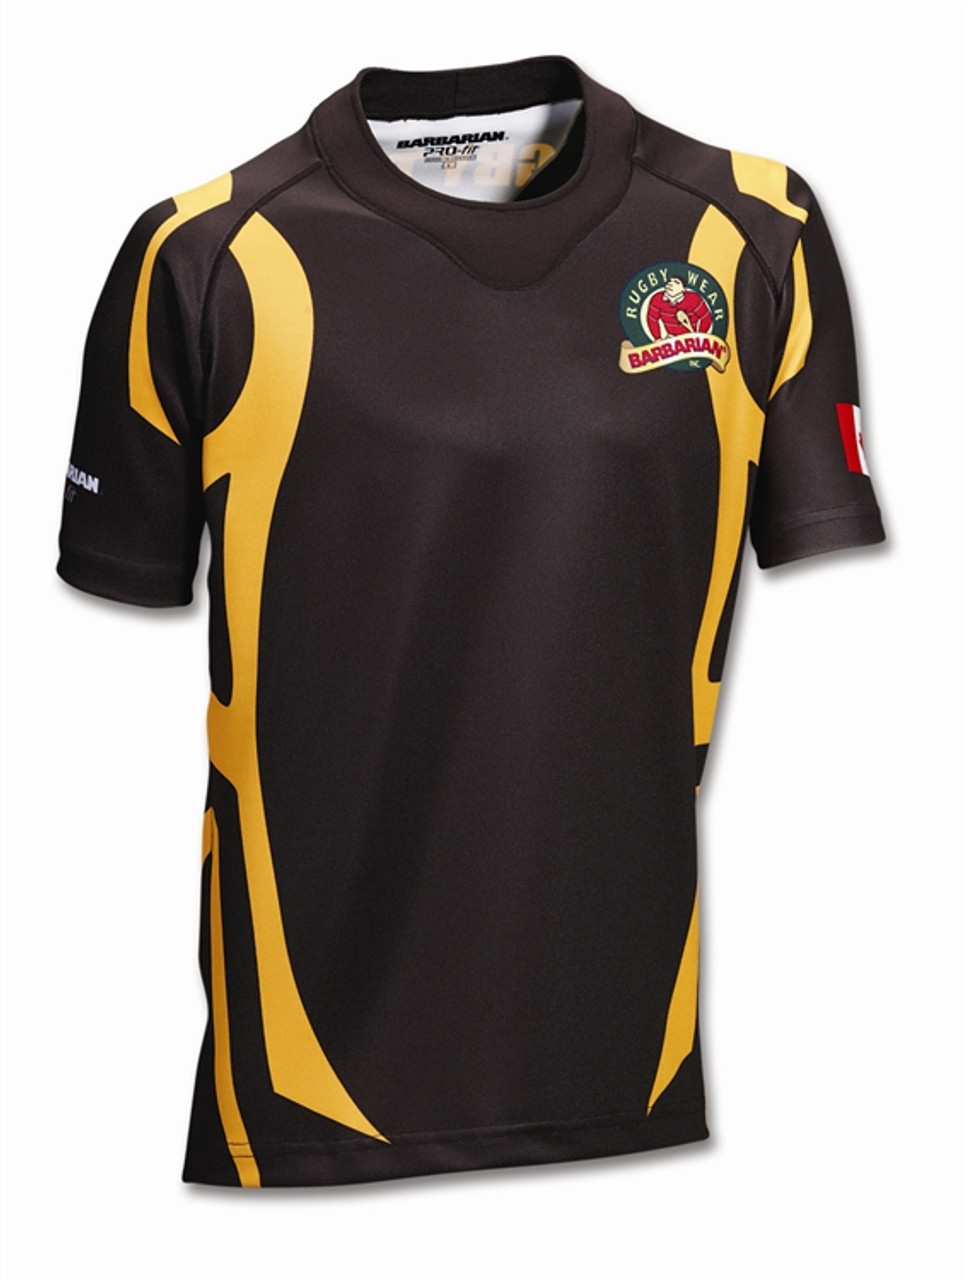 sublimated jerseys